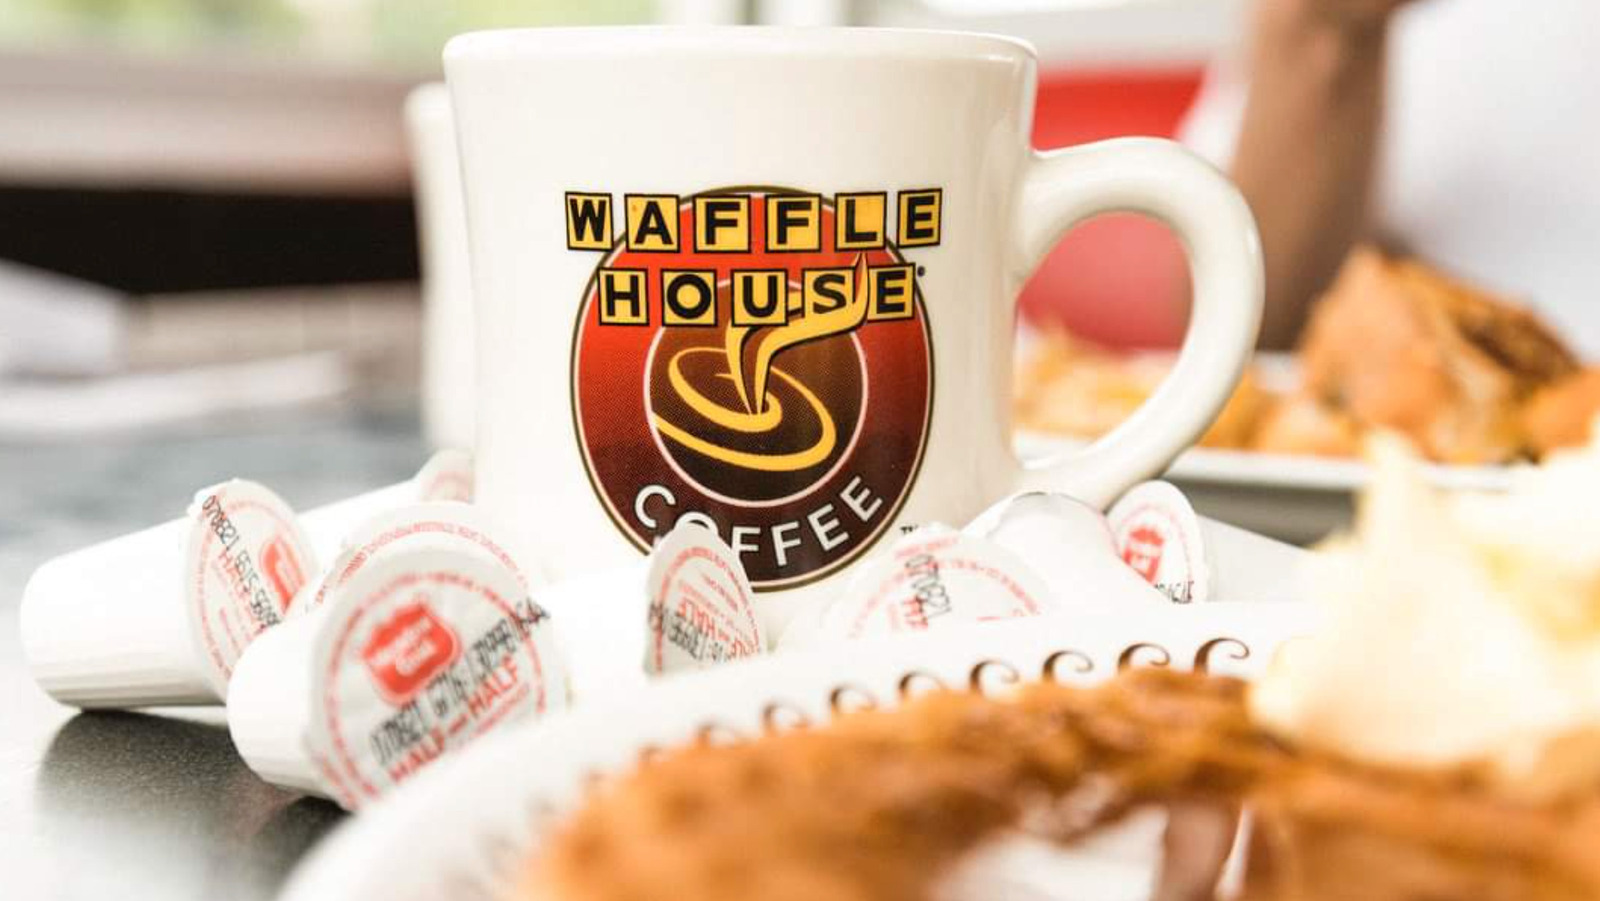 https://www.thedailymeal.com/img/gallery/the-recently-viral-waffle-house-waffle-sandwich-costs-a-pretty-penny/l-intro-1674751478.jpg